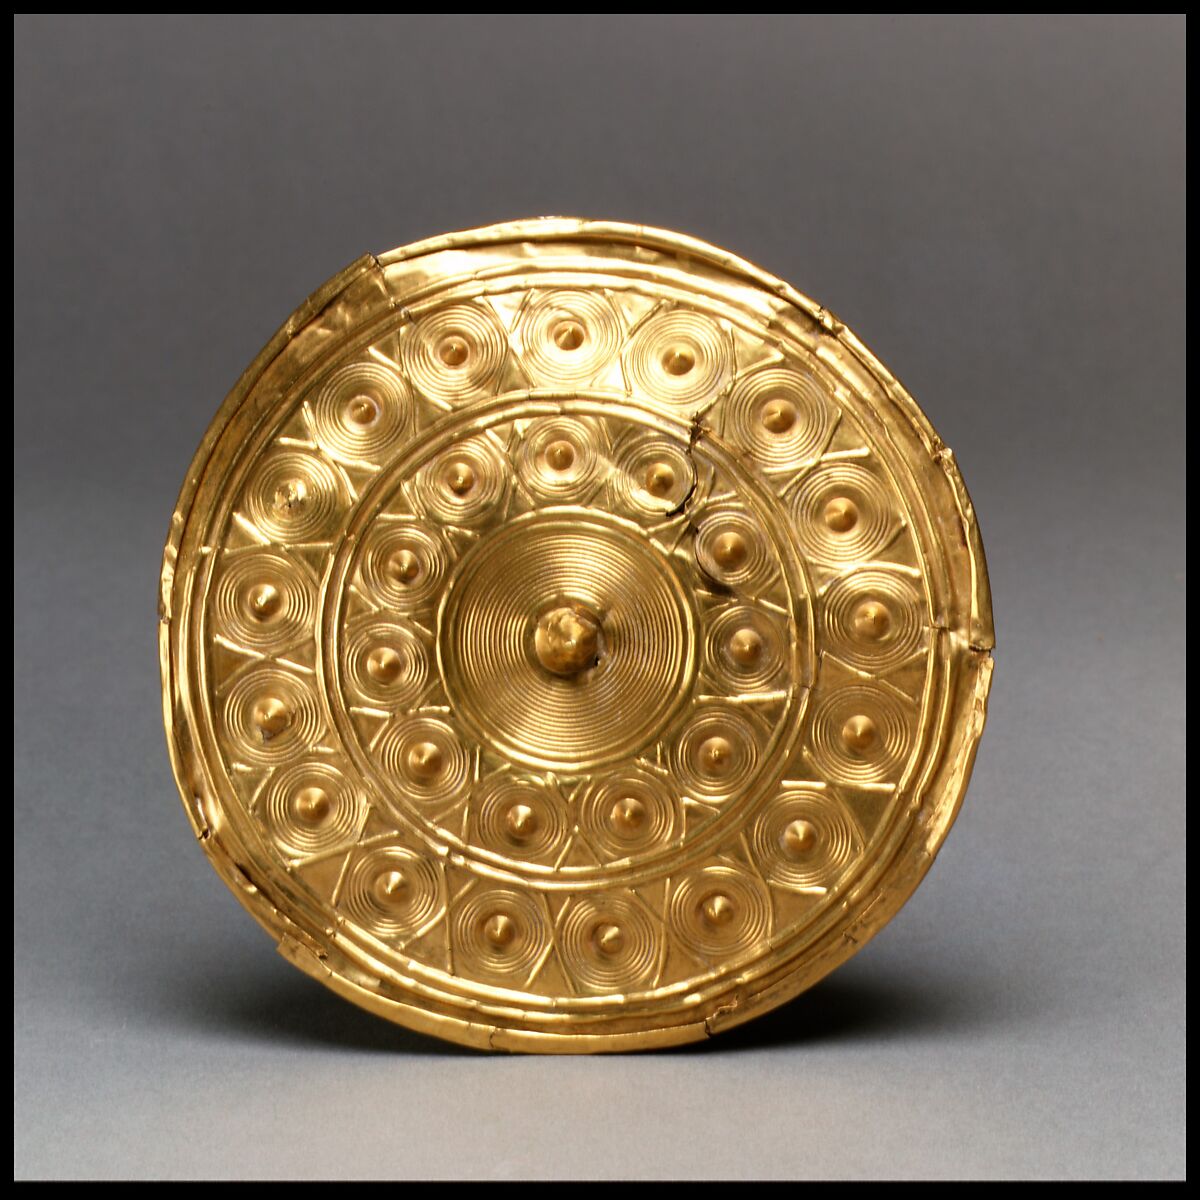 Disk from a Reel, Gold, Irish 